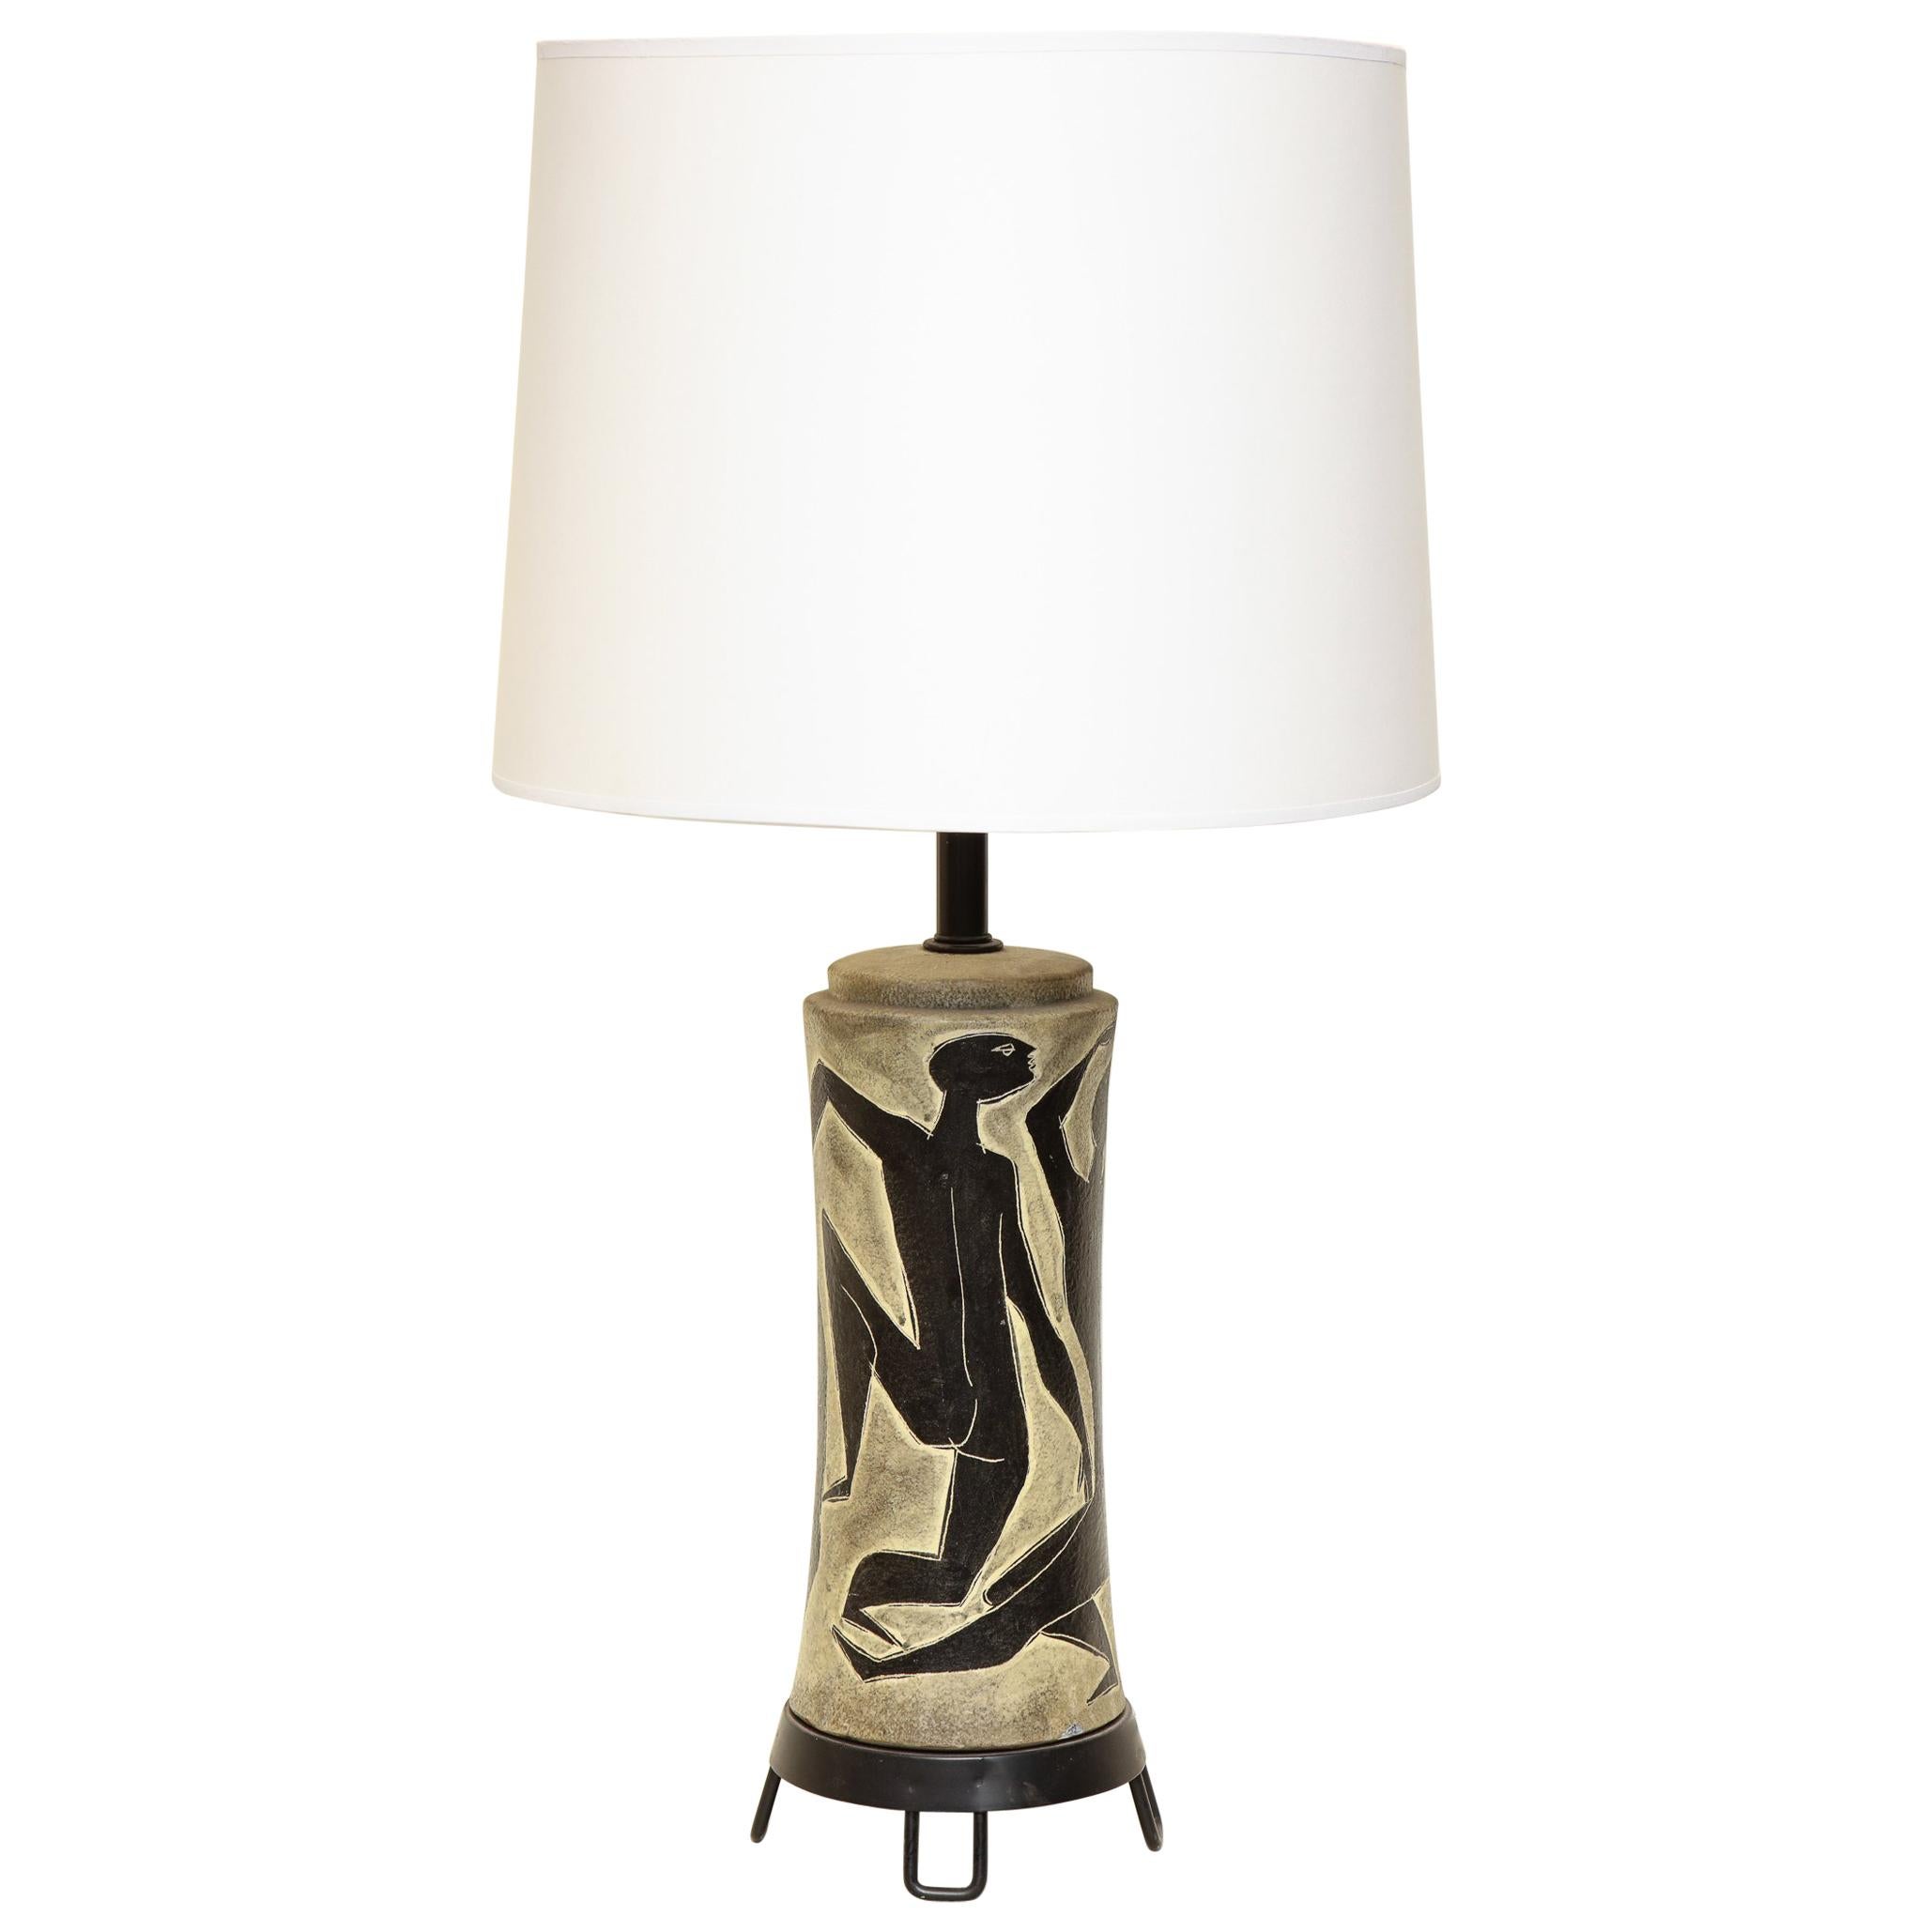 Fantoni Table Lamp Ceramic with Incised Stylized Men, Mid-Century Modern, 1950s For Sale